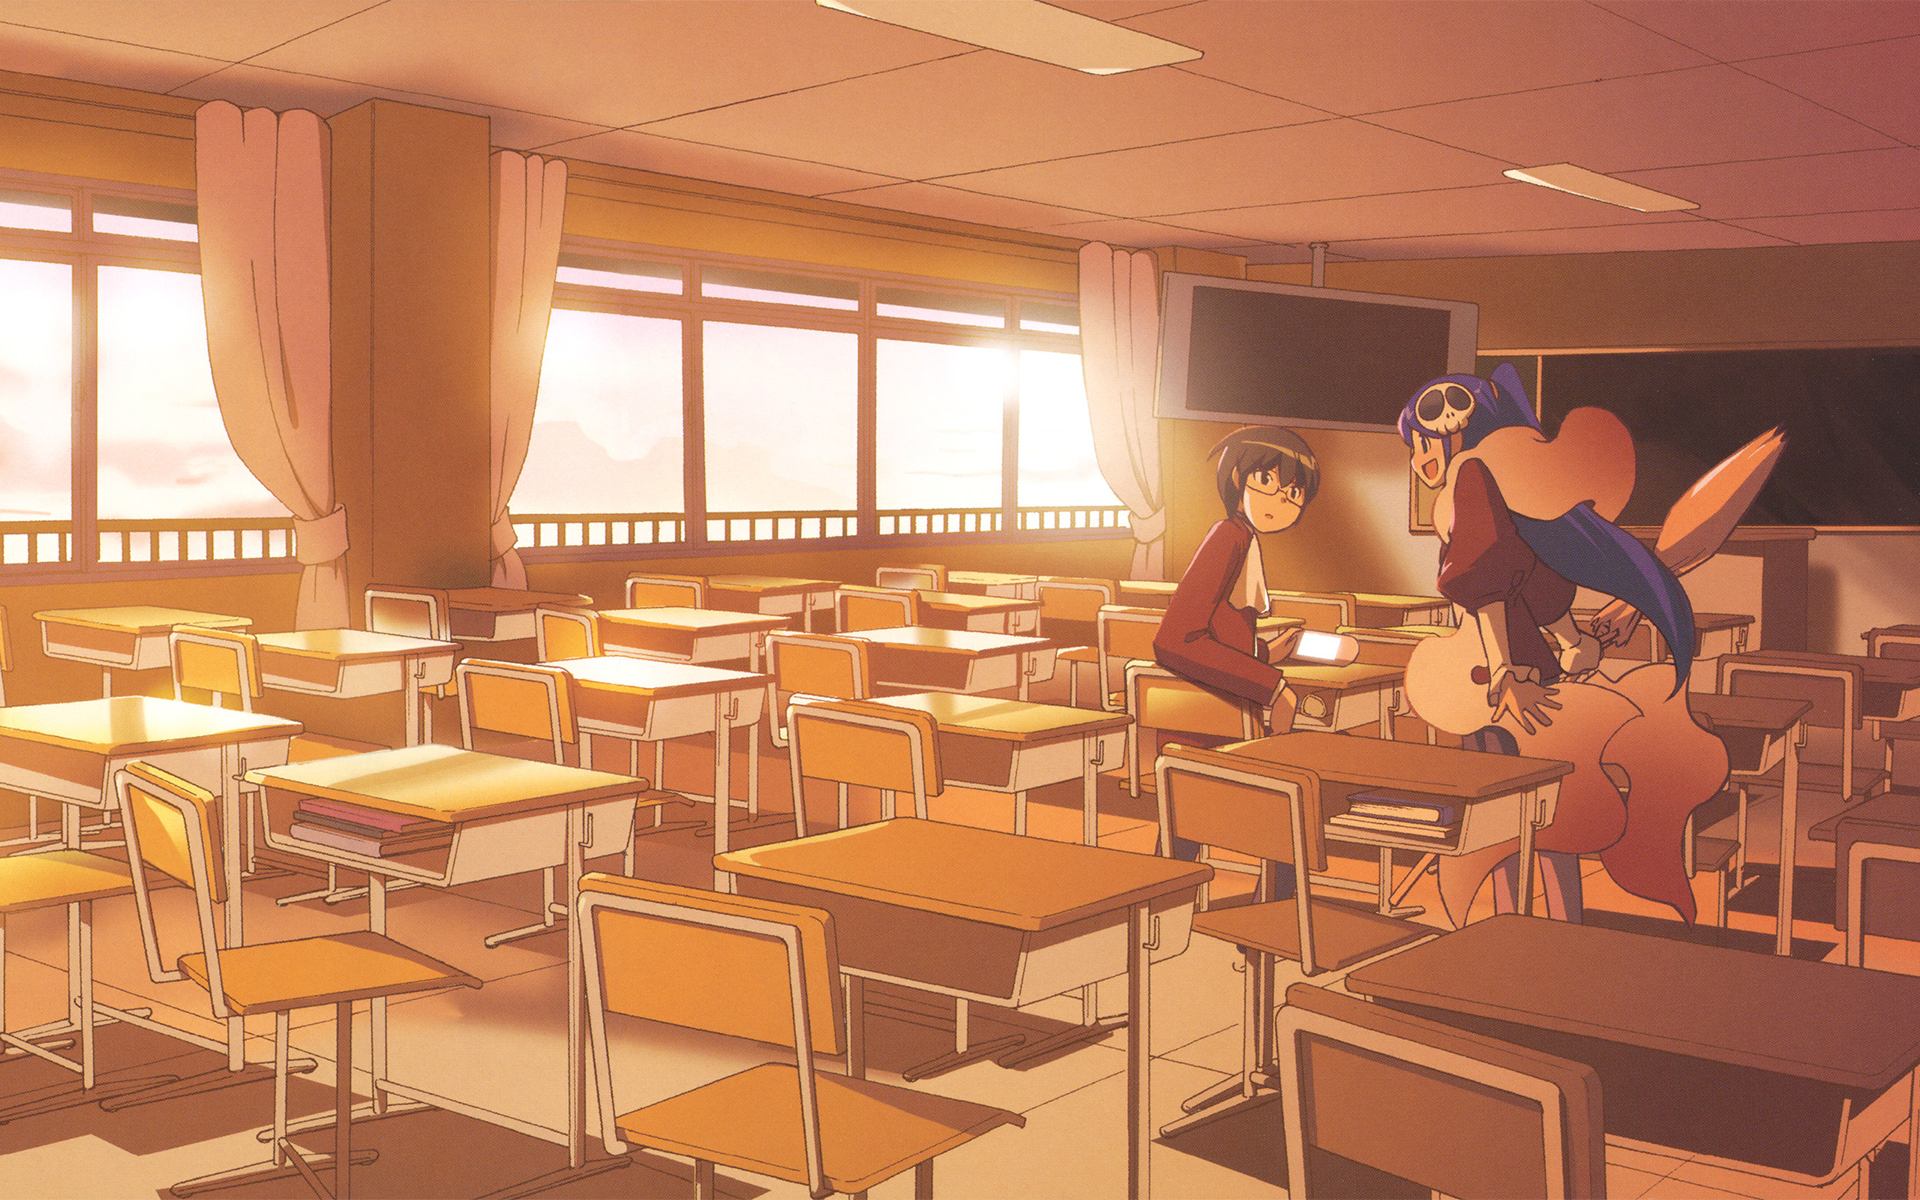 Classroom The Wallpaper 1920x1200 Classroom The World God Only